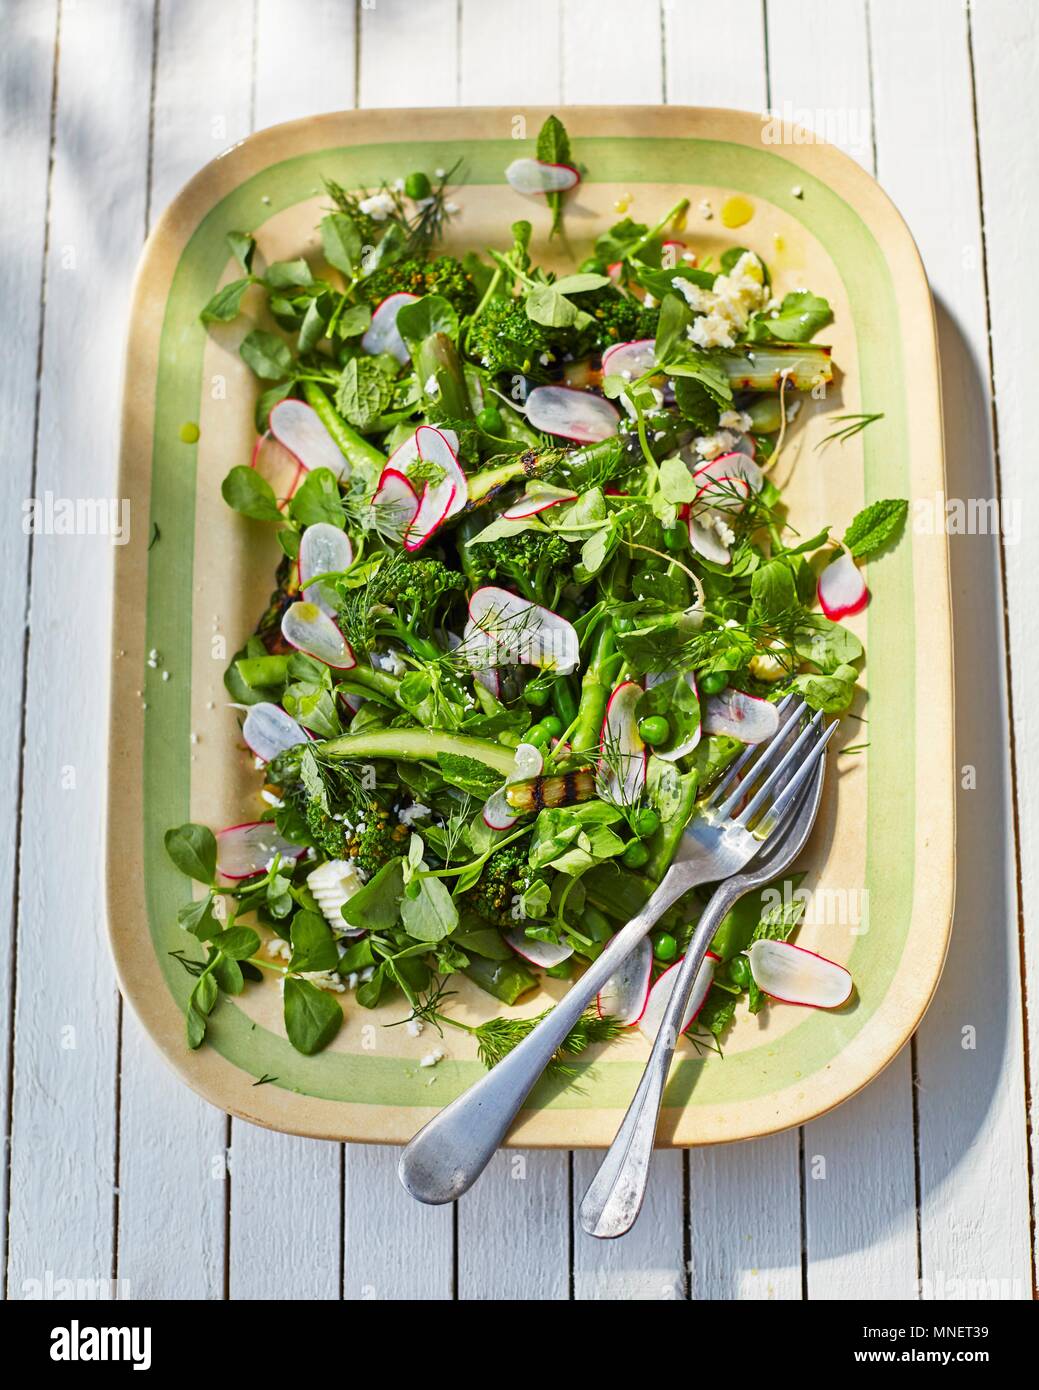 Broccoli and spinach salad with radishes and peas Stock Photo